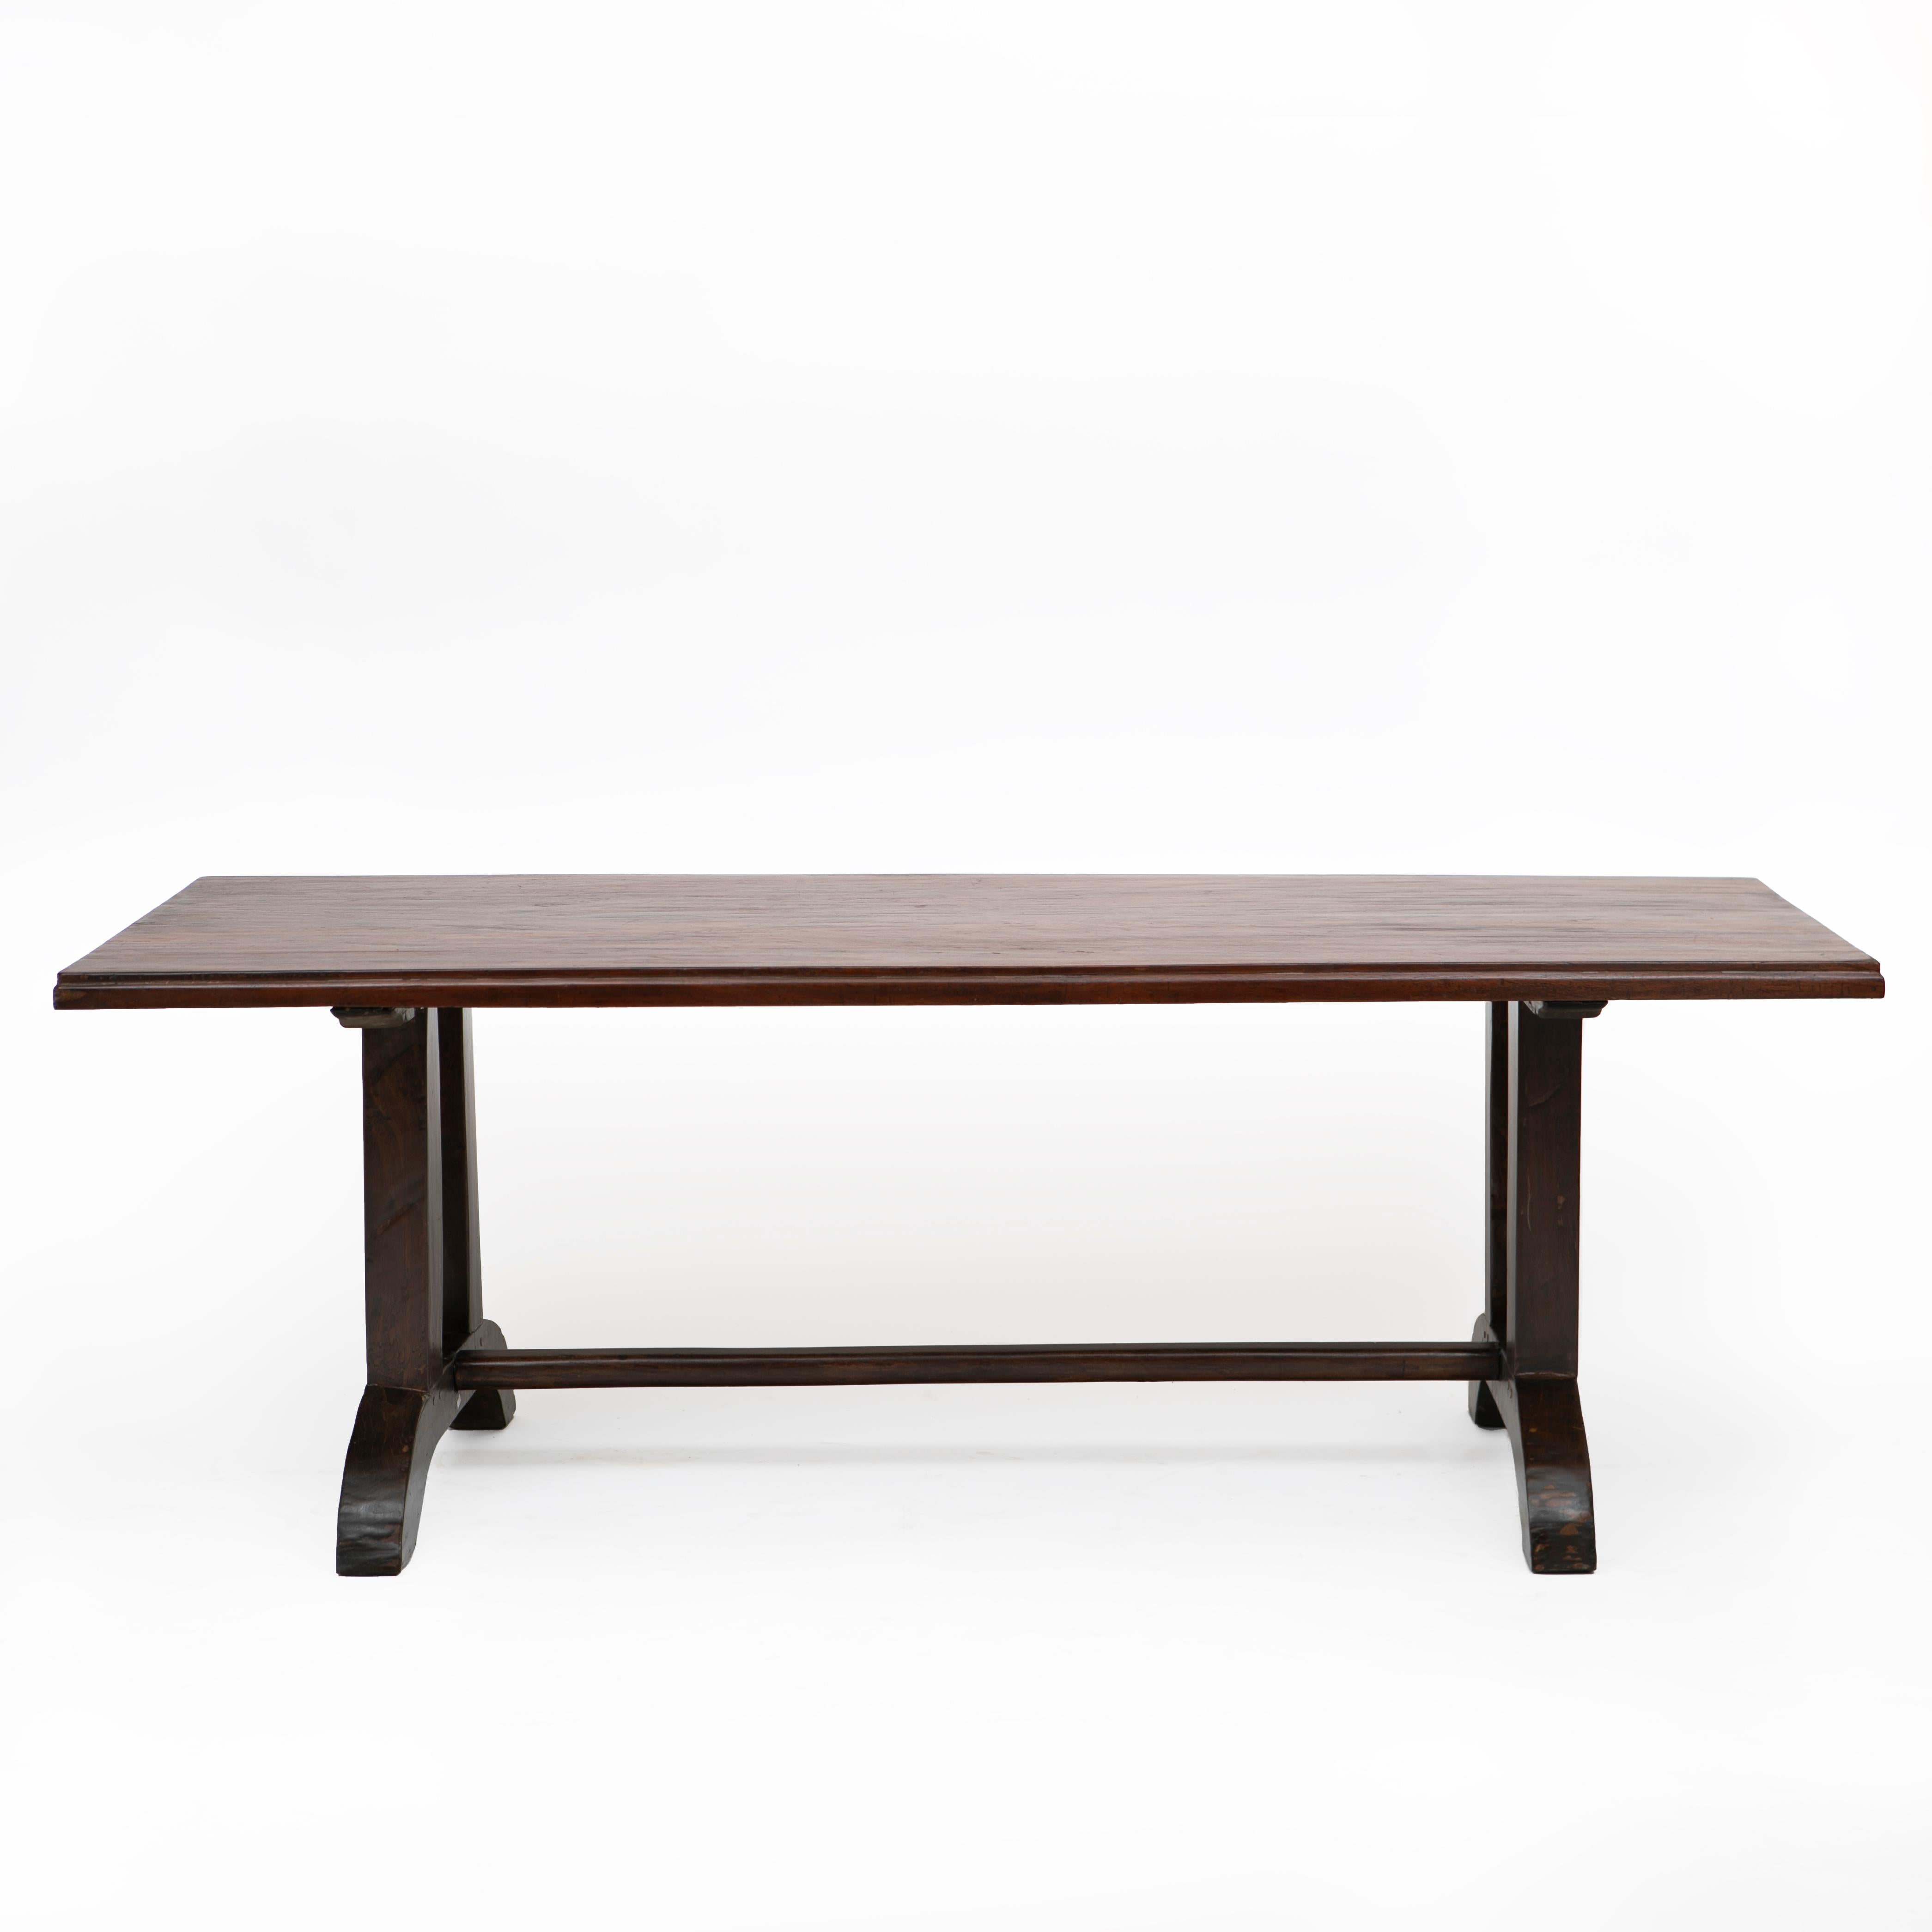 Spanish Colonial baroque style refectory dinning table crafted in narra hardwood.
Rectangular 4.5 cm thick one-piece table top with with moulded edge.
The Philippines were a Spanish colony for over 300 years, so this is a wonderful example of